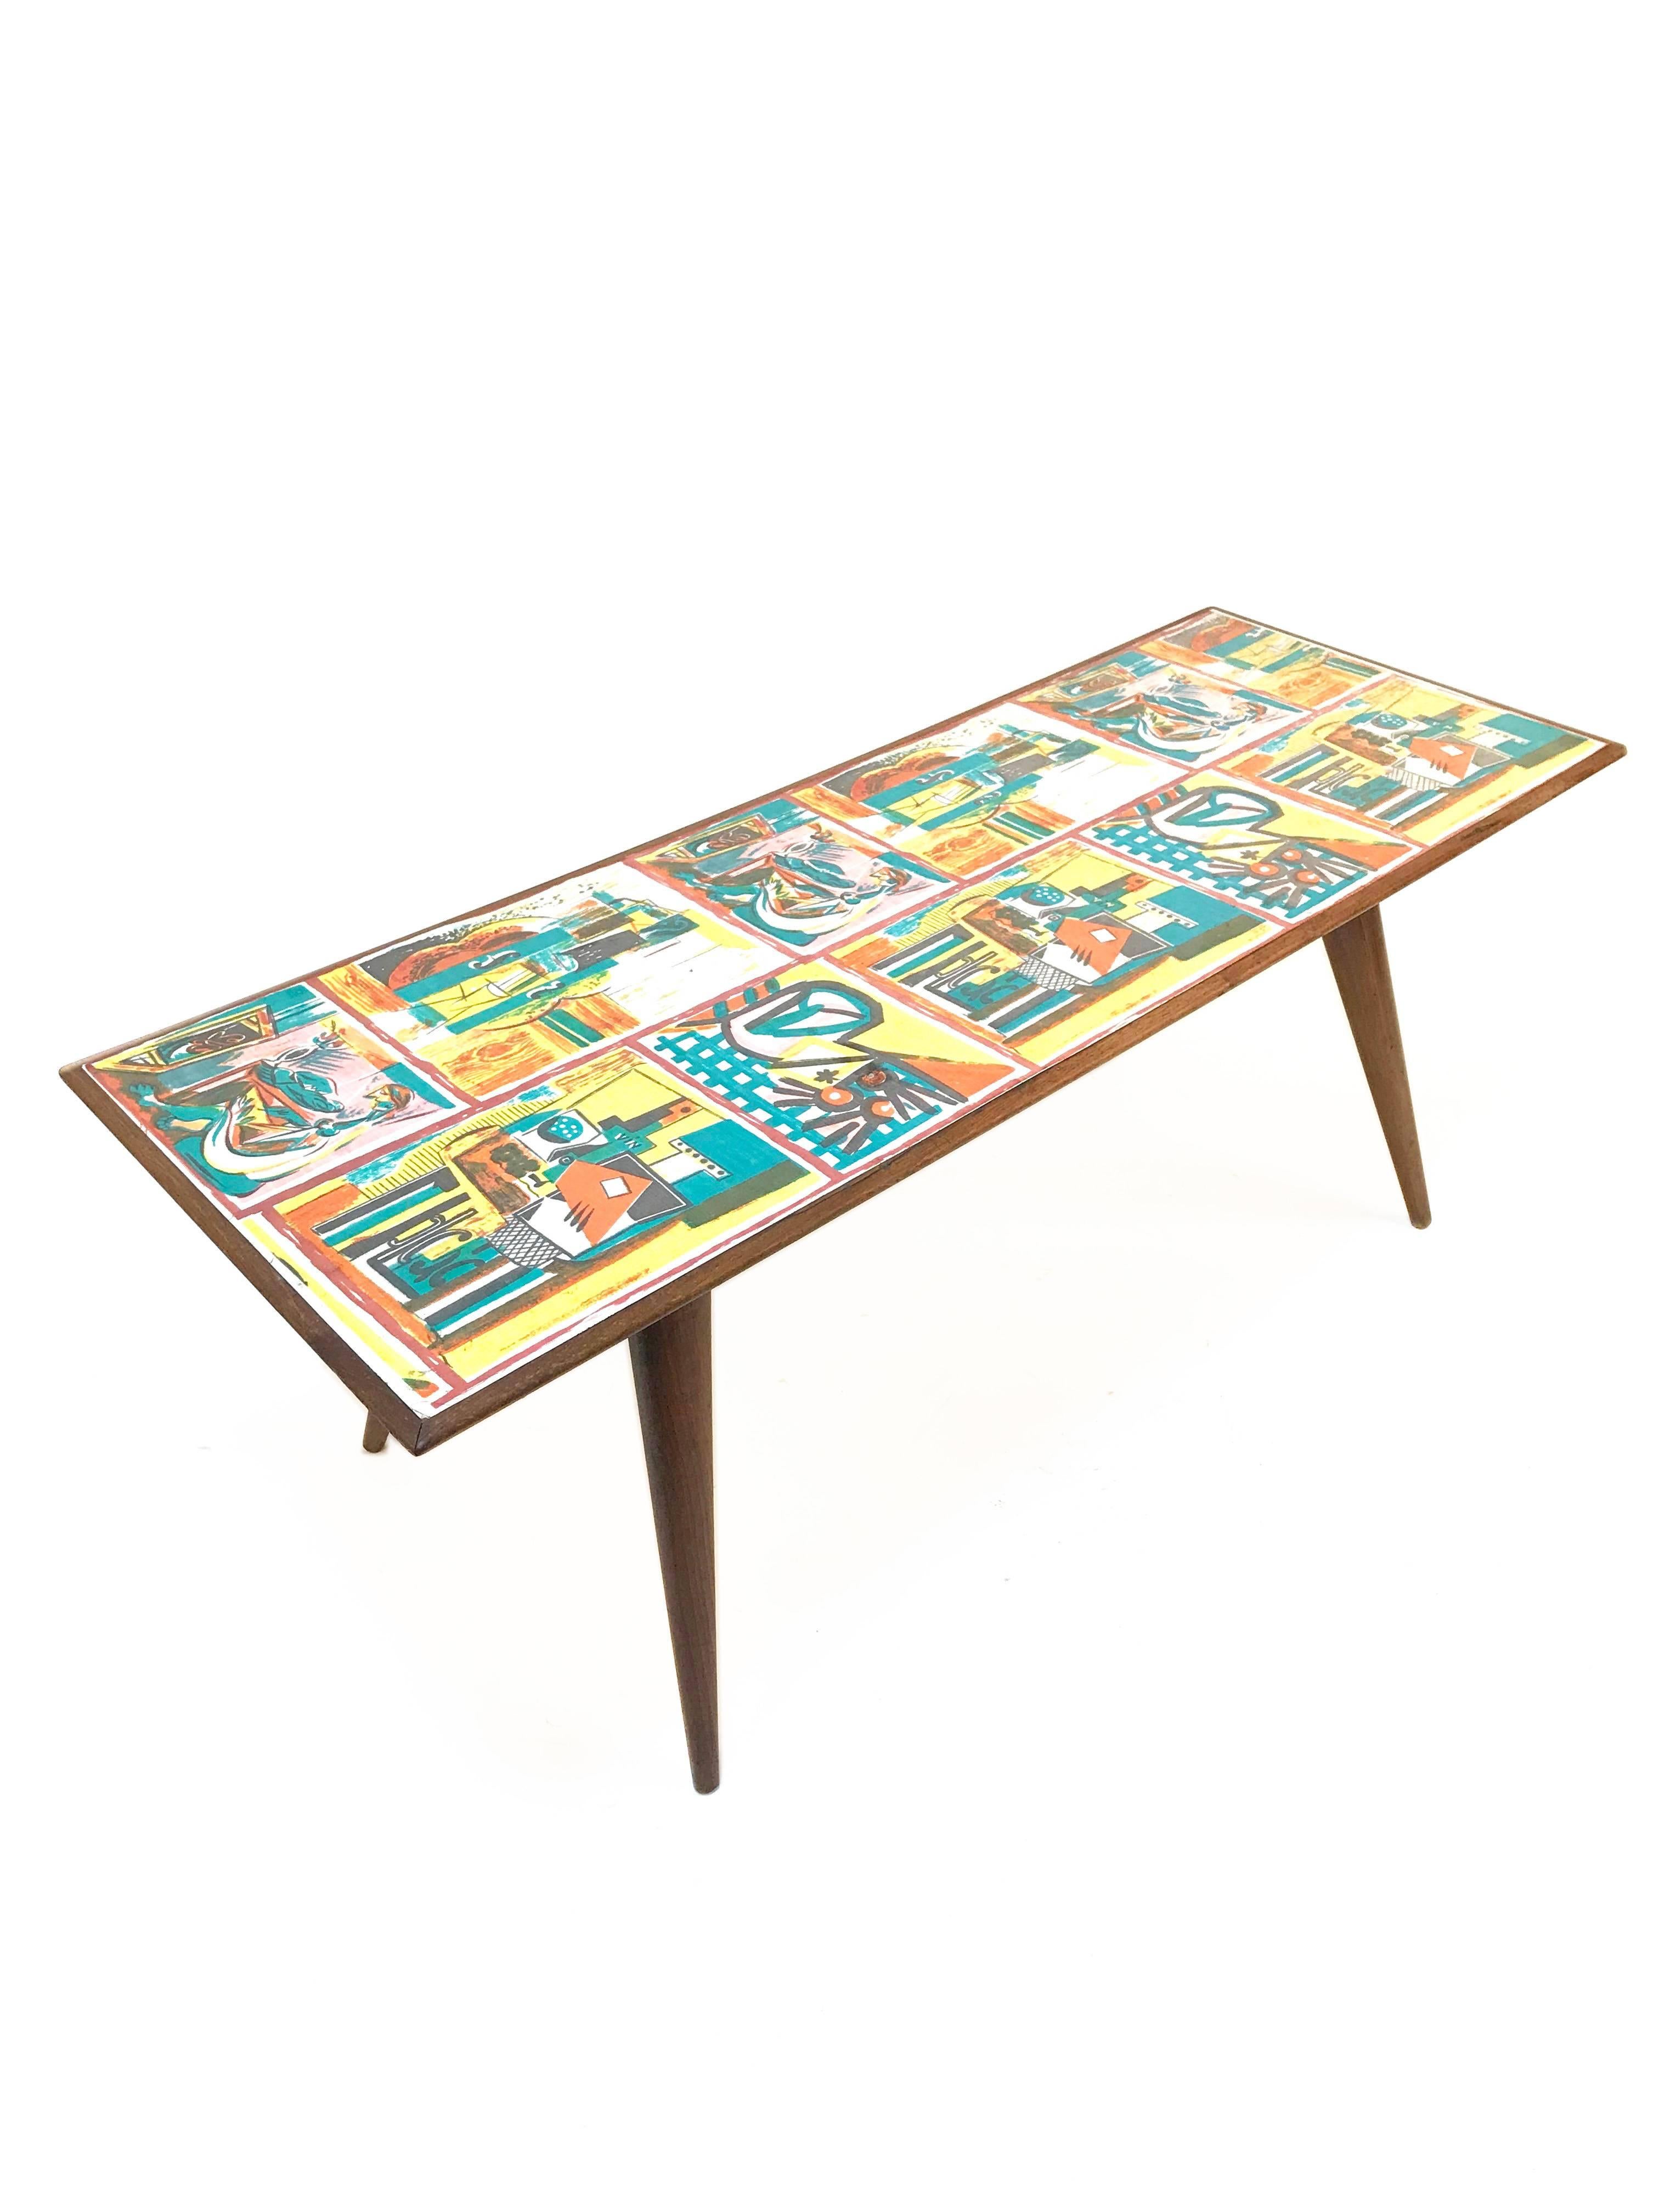 Laminated Midcentury Printed Wood and Plastic Italian Coffee Table after De Poli, 1950s For Sale